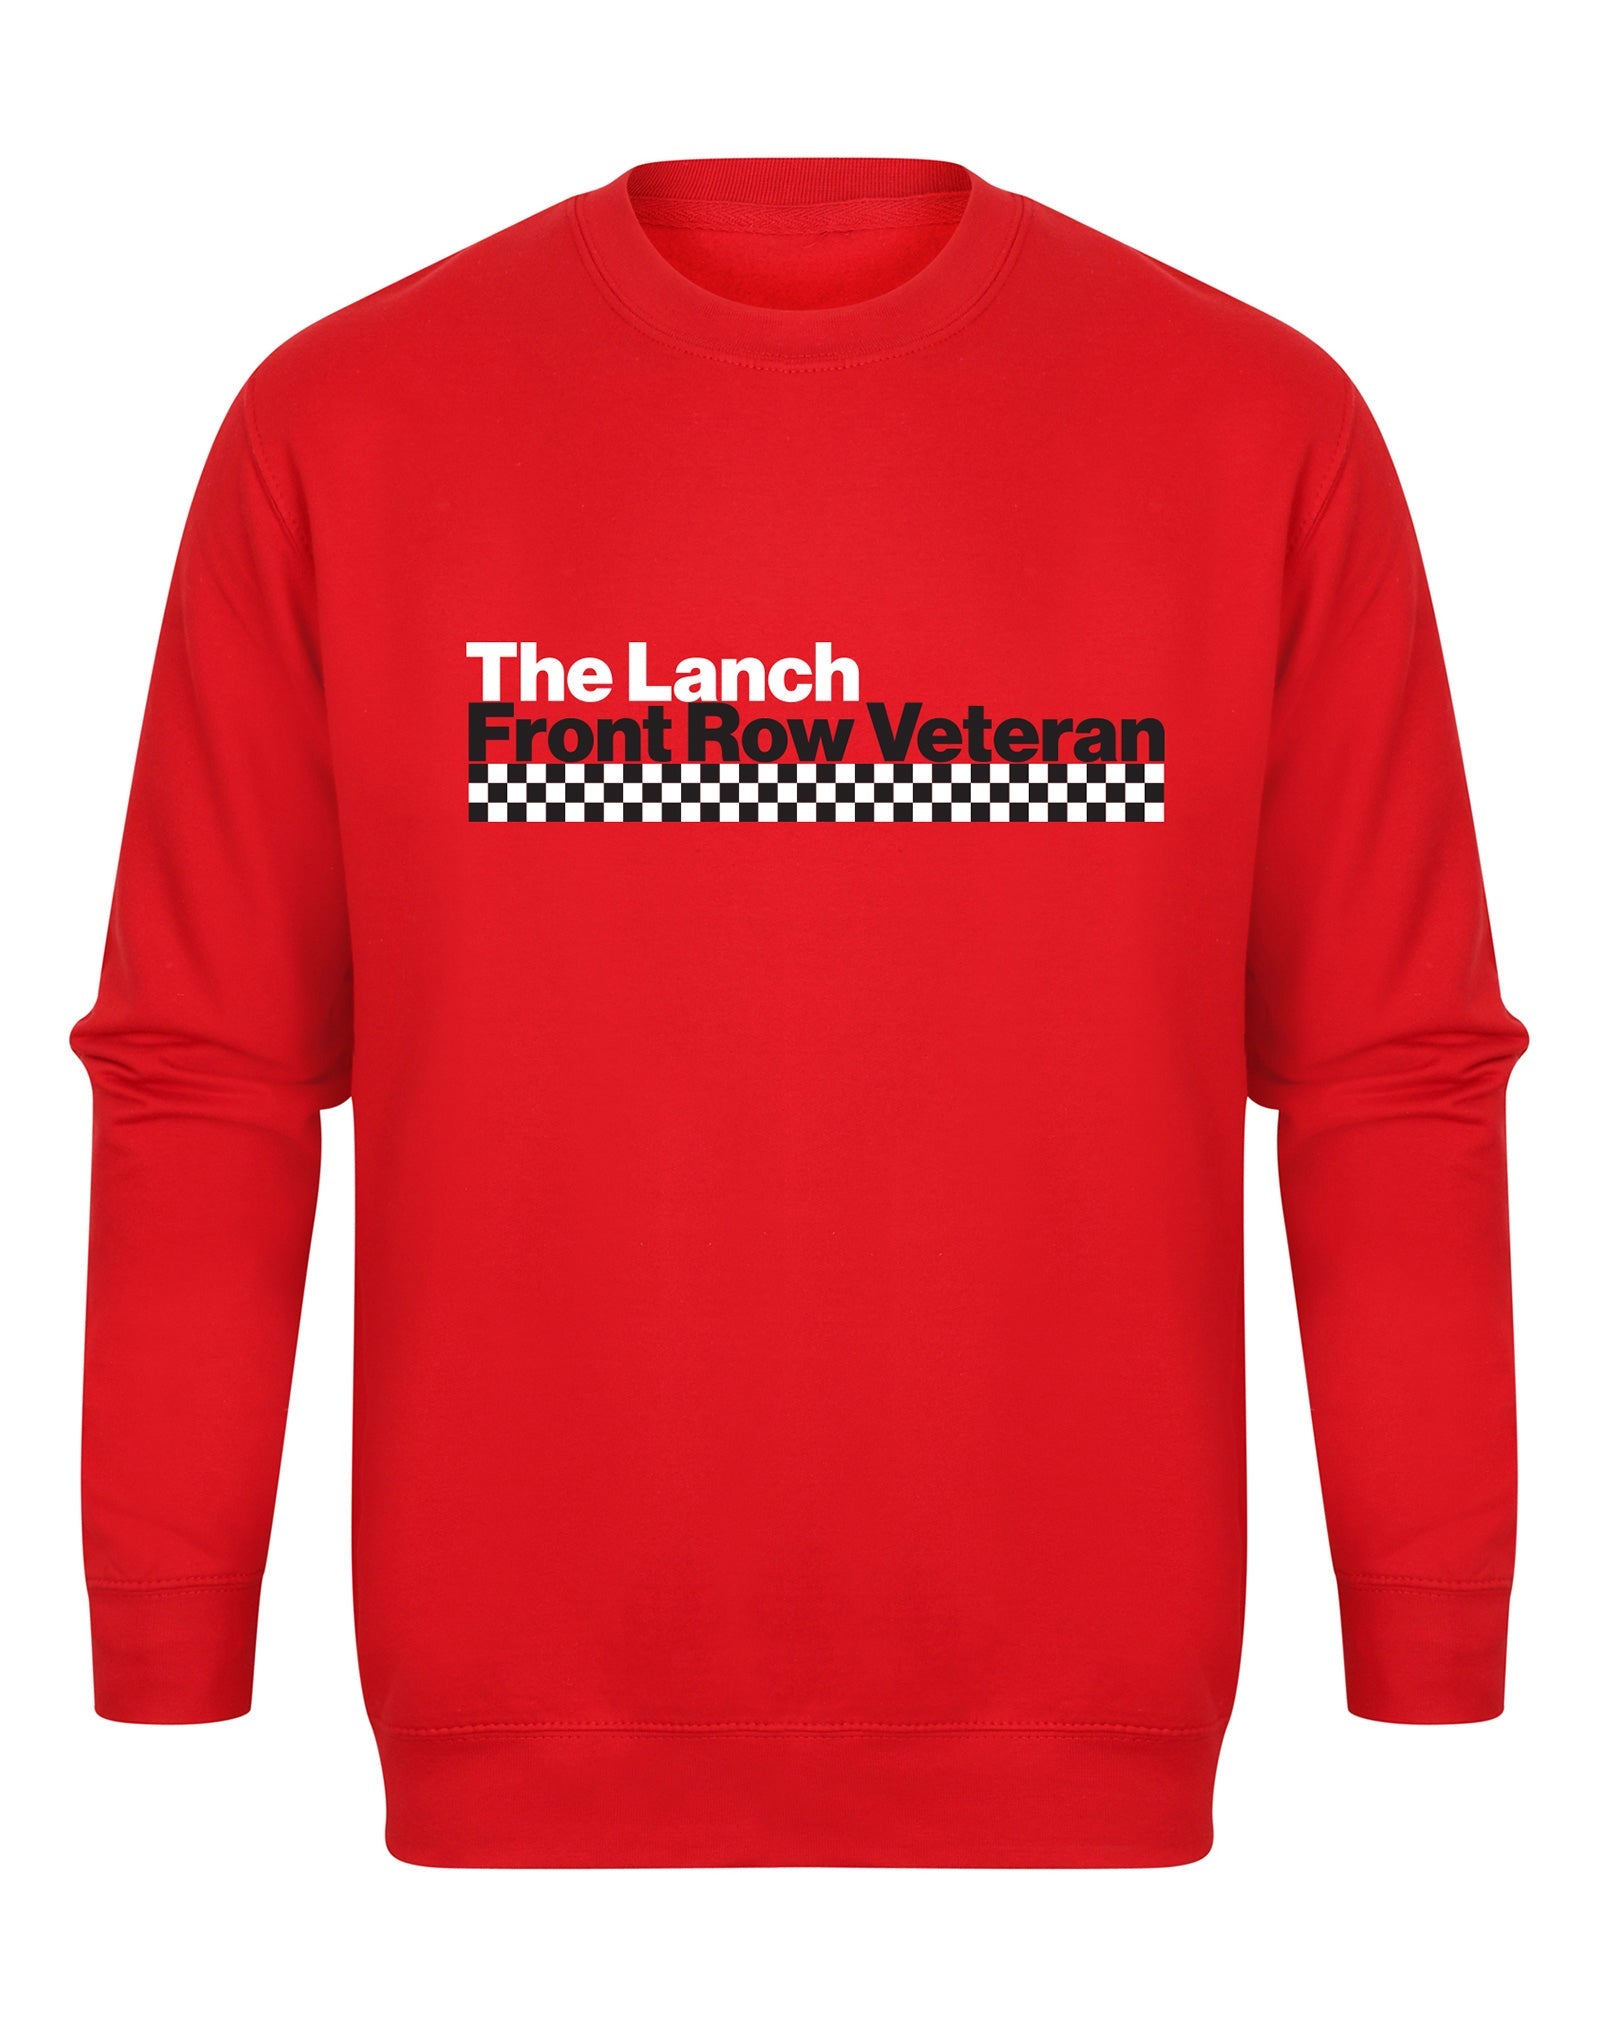 The Lanch - Front Row Veteran - unisex sweatshirt - various colours - Dirty Stop Outs